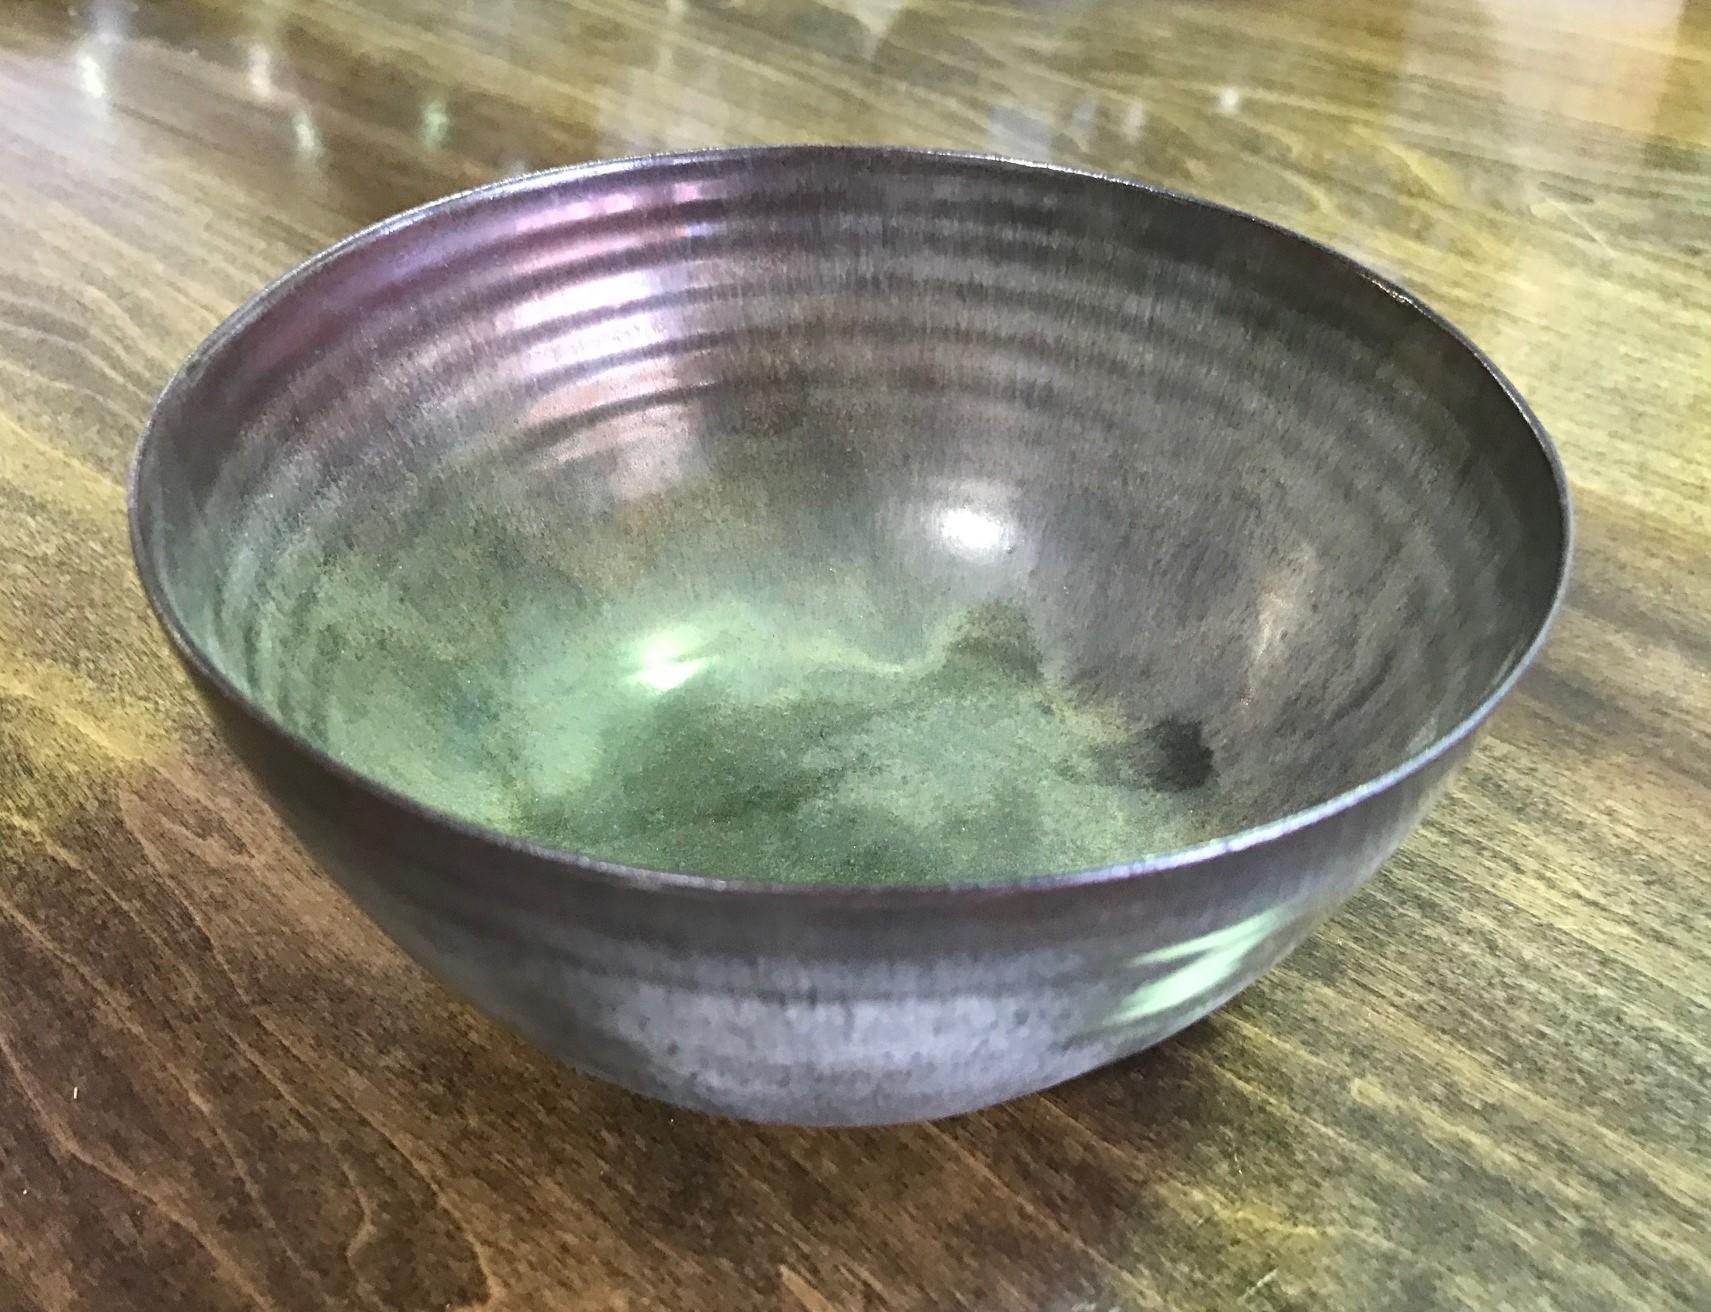 A masterful, rich work by famed potters Otto and Gertrud Natzler. This round-shaped footed bowl was delicately hand thrown and formed by Gertrud and glazed by Otto with a gorgeous dark, blue-grey crystalline reduction glaze. The bowl captures your